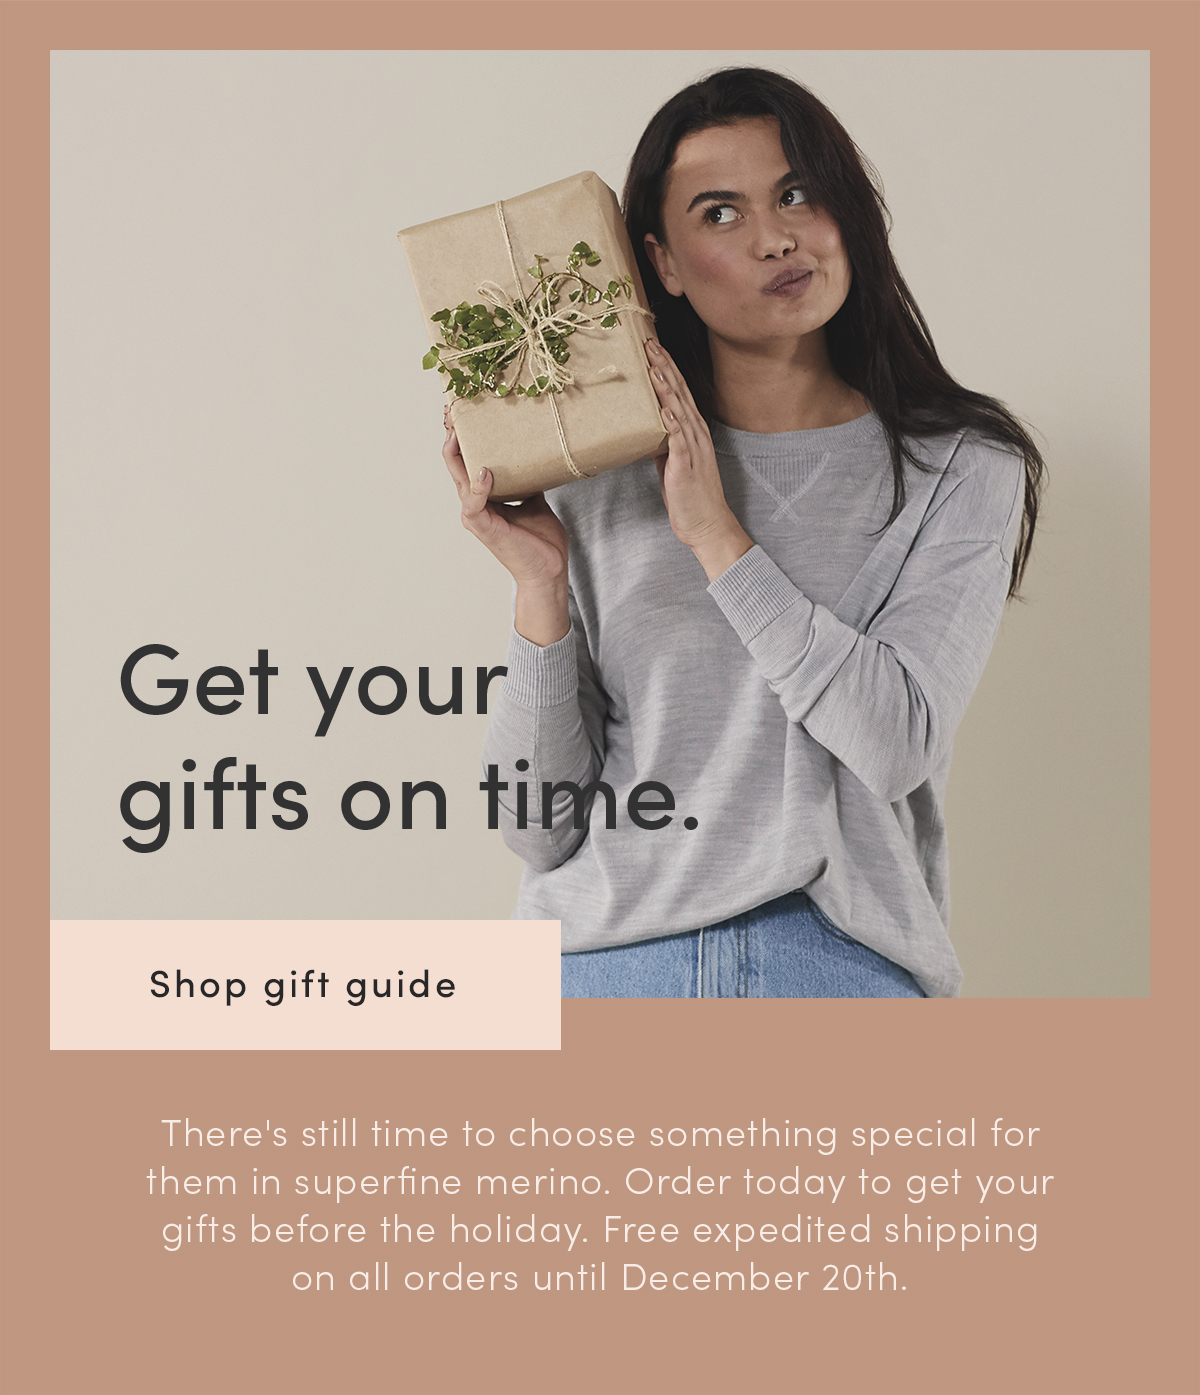 Shop gift guide